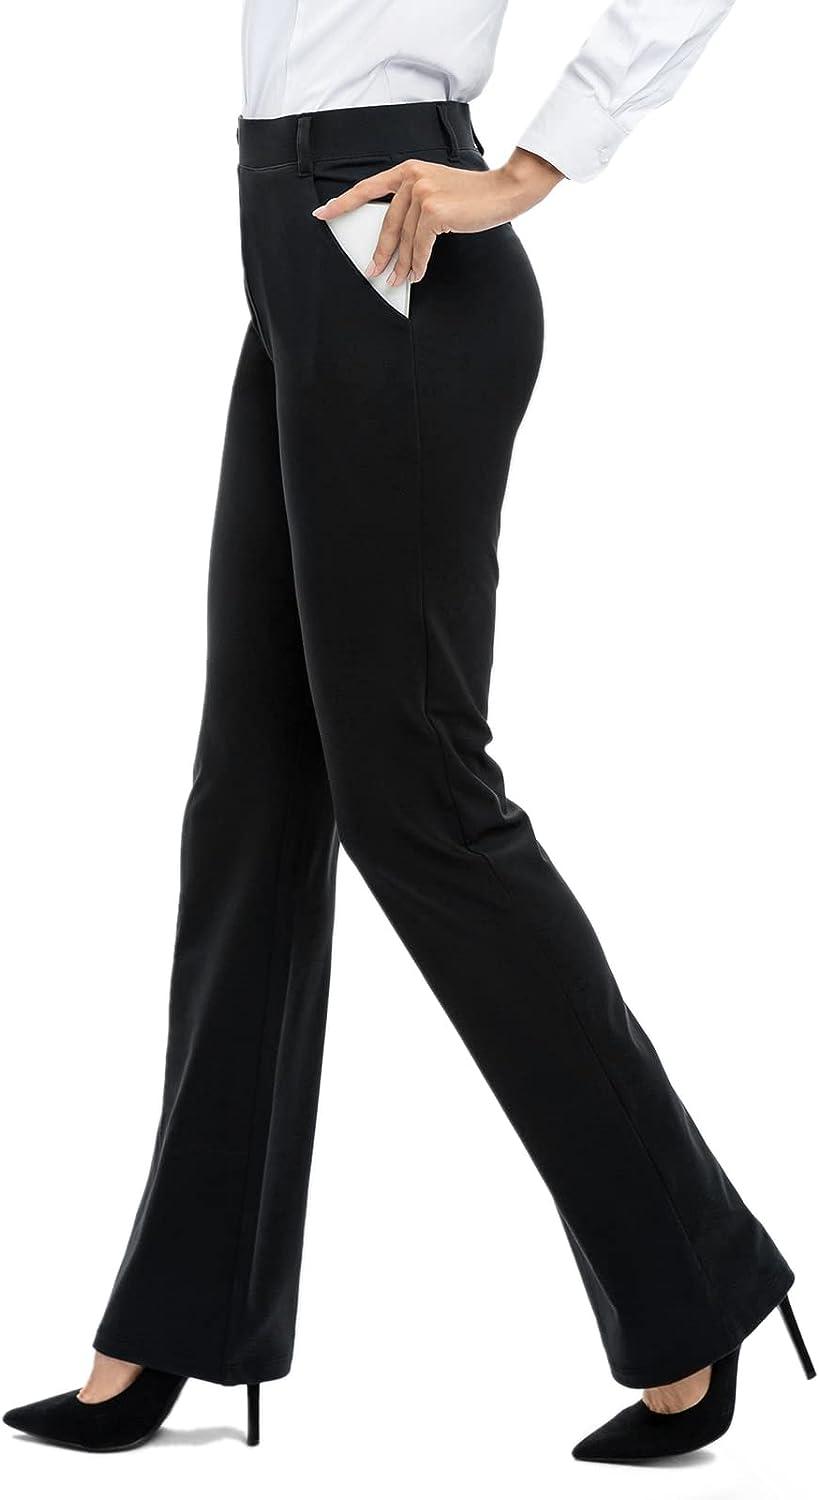 Women's Yoga Dress Pants Bootcut Stretchy Work Slacks Office Business  Casual Golf Pant with 4 Pockets 31Inseam Large Black